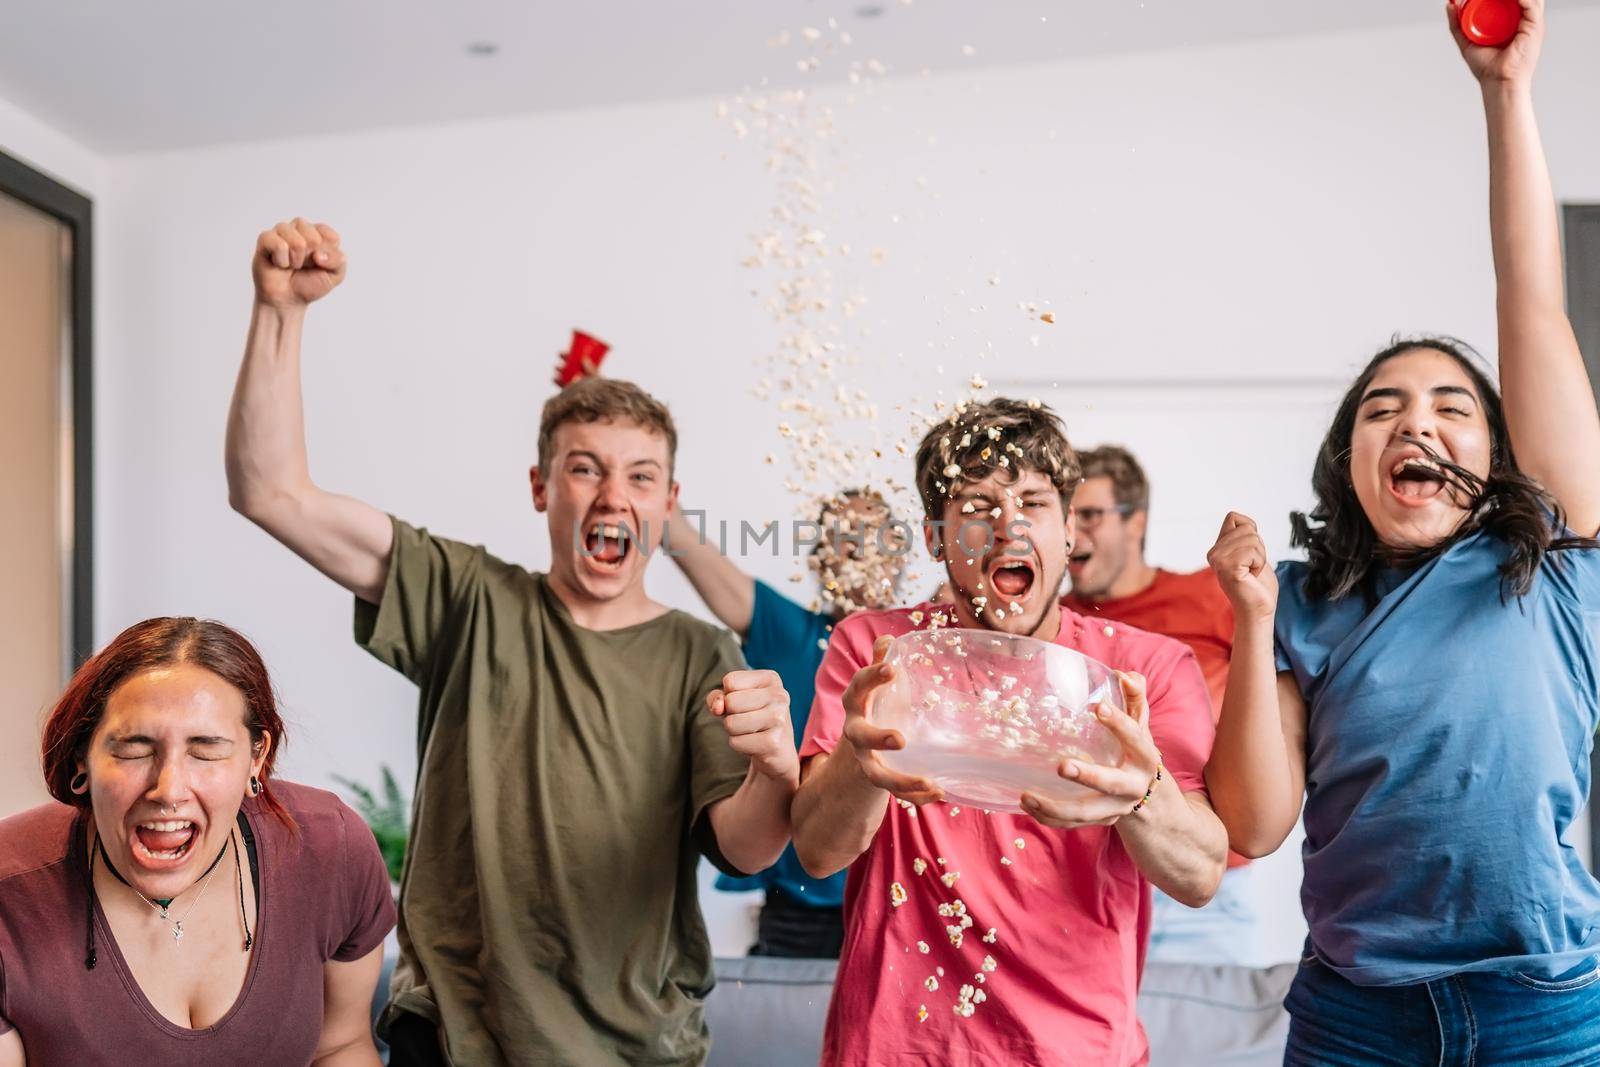 Excited youngsters throwing popcorn in the air after their team's e-sports victory, broadcast on television. by CatPhotography